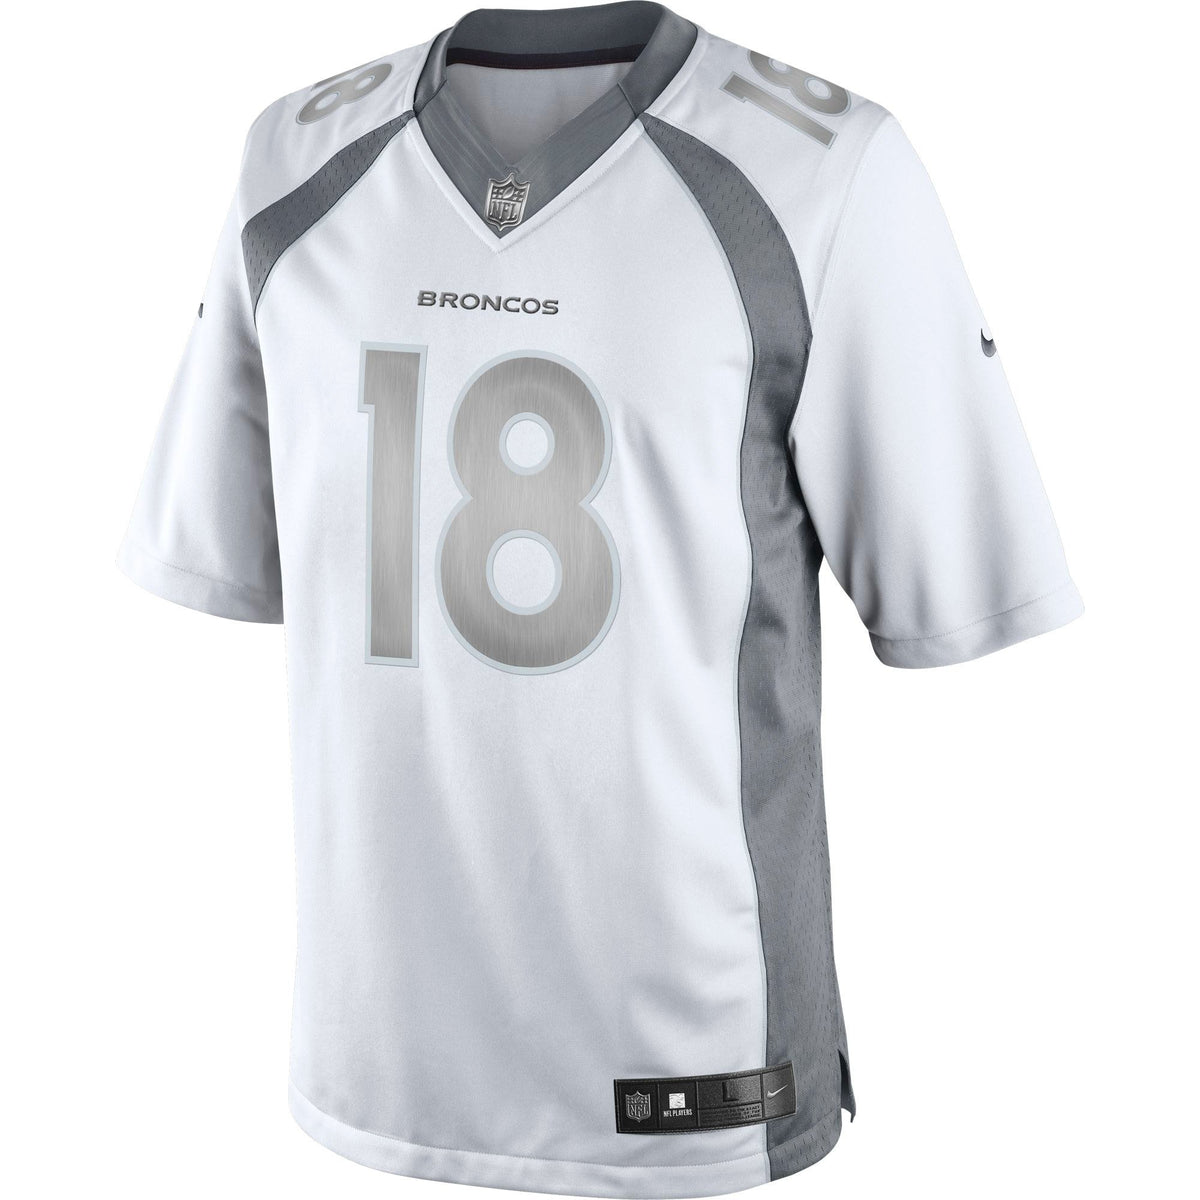 manning limited jersey